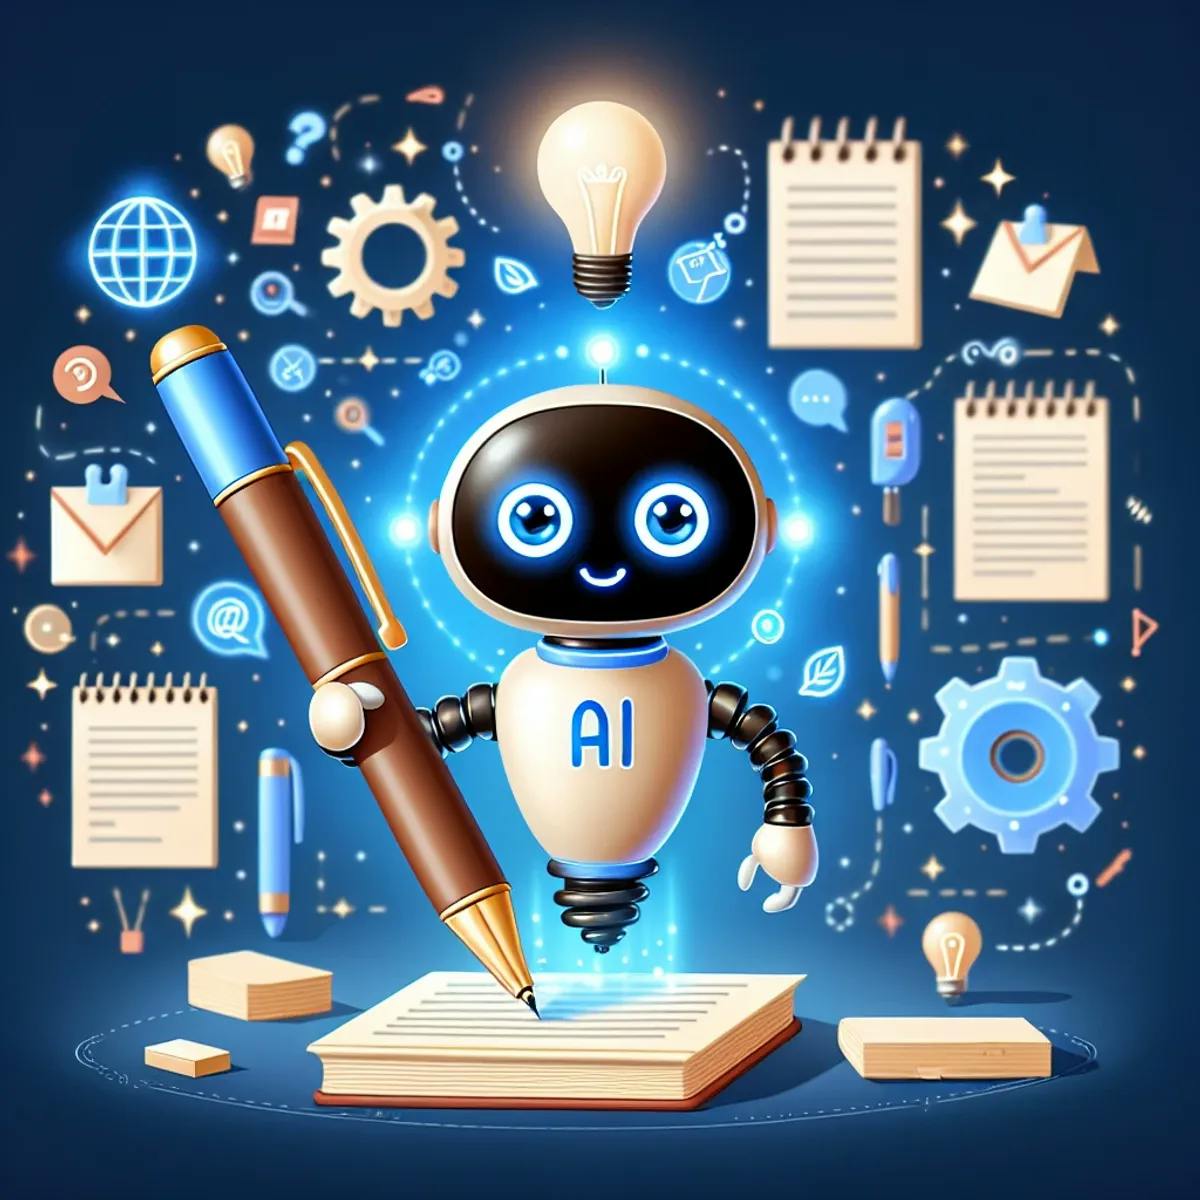 An AI character holding a stylized pen, surrounded by symbols of a light bulb, notepad, and gear.